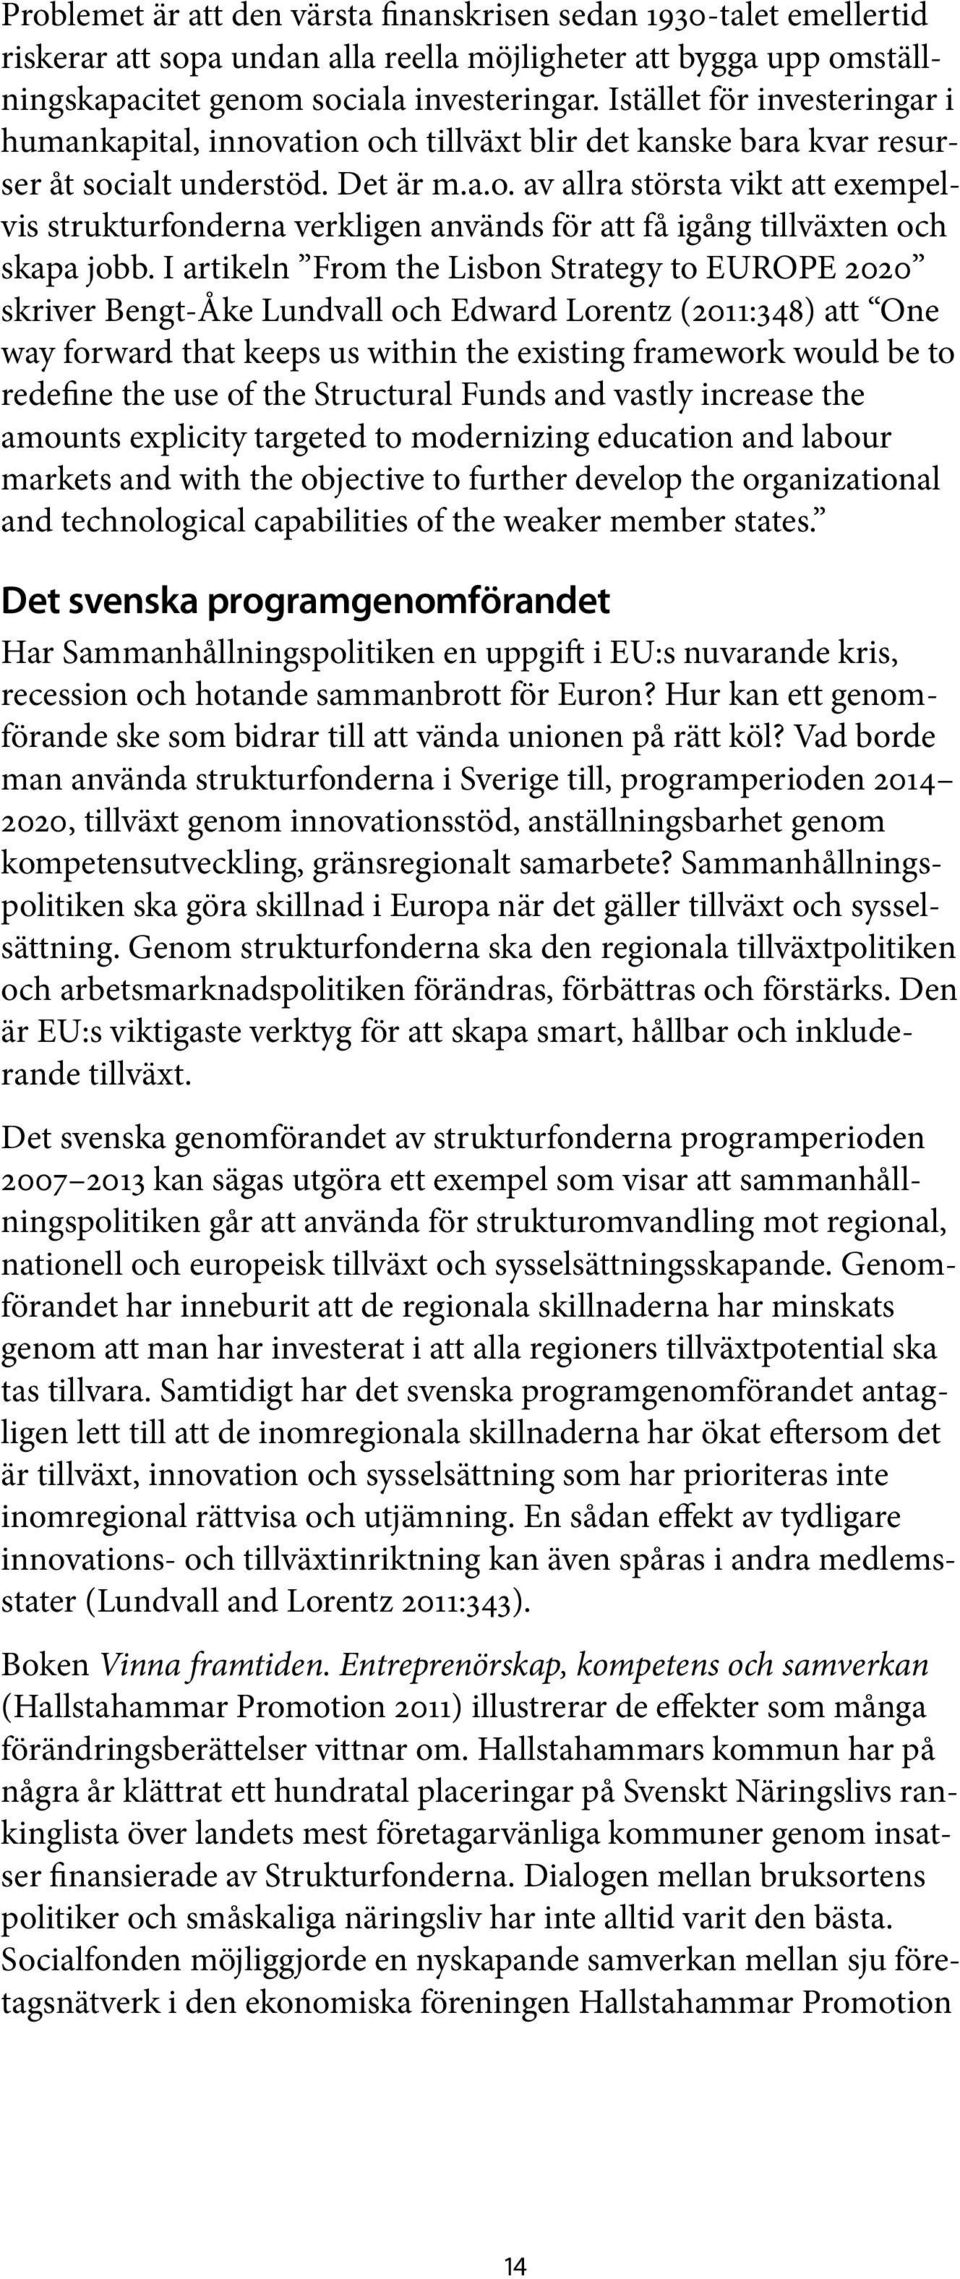 I artikeln From the Lisbon Strategy to EUROPE 2020 skriver Bengt-Åke Lundvall och Edward Lorentz (2011:348) att One way forward that keeps us within the existing framework would be to redefine the